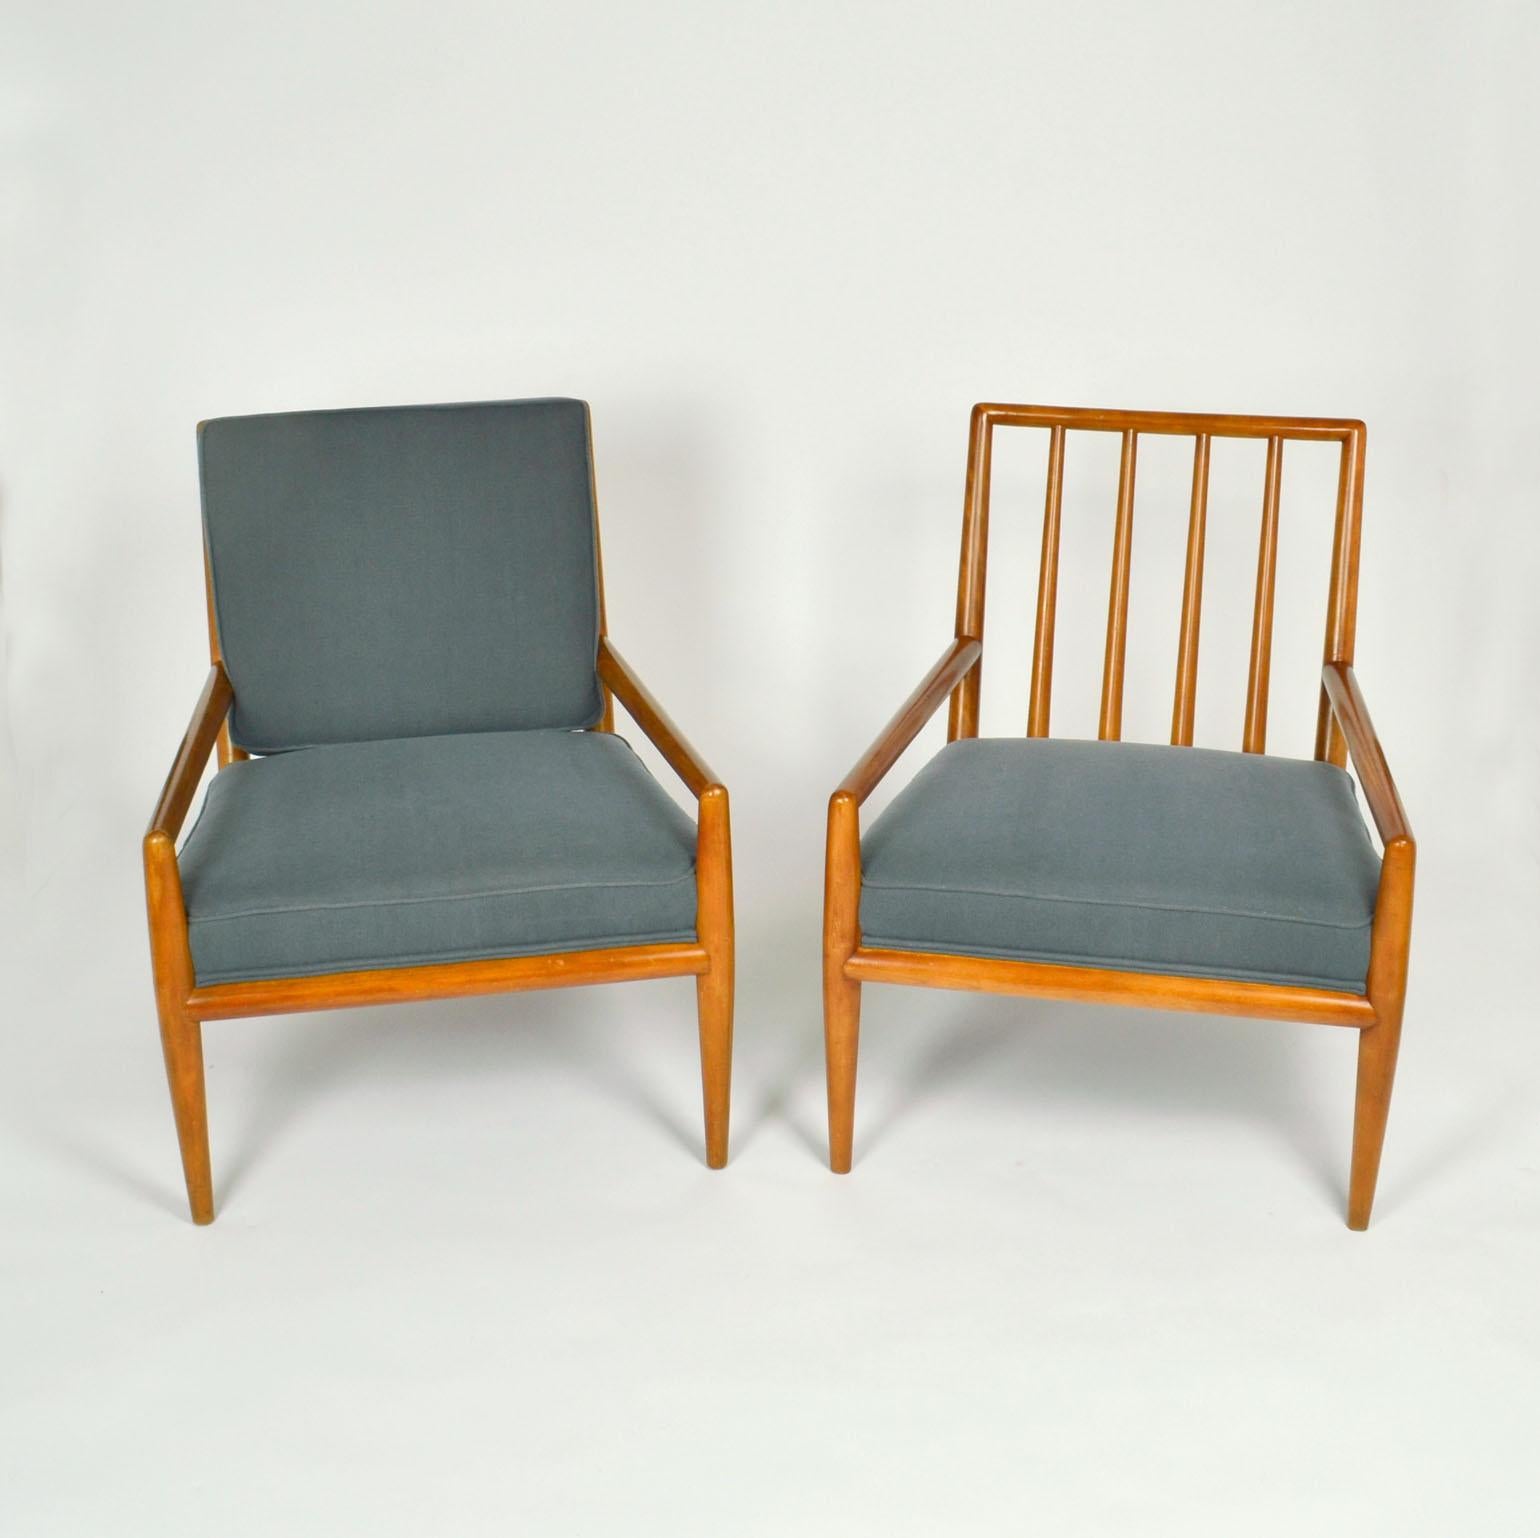 Wool T.H. Robsjohn-Gibbons Pair of Arm Chairs and Foot Stool, Widdicomb 1950's For Sale